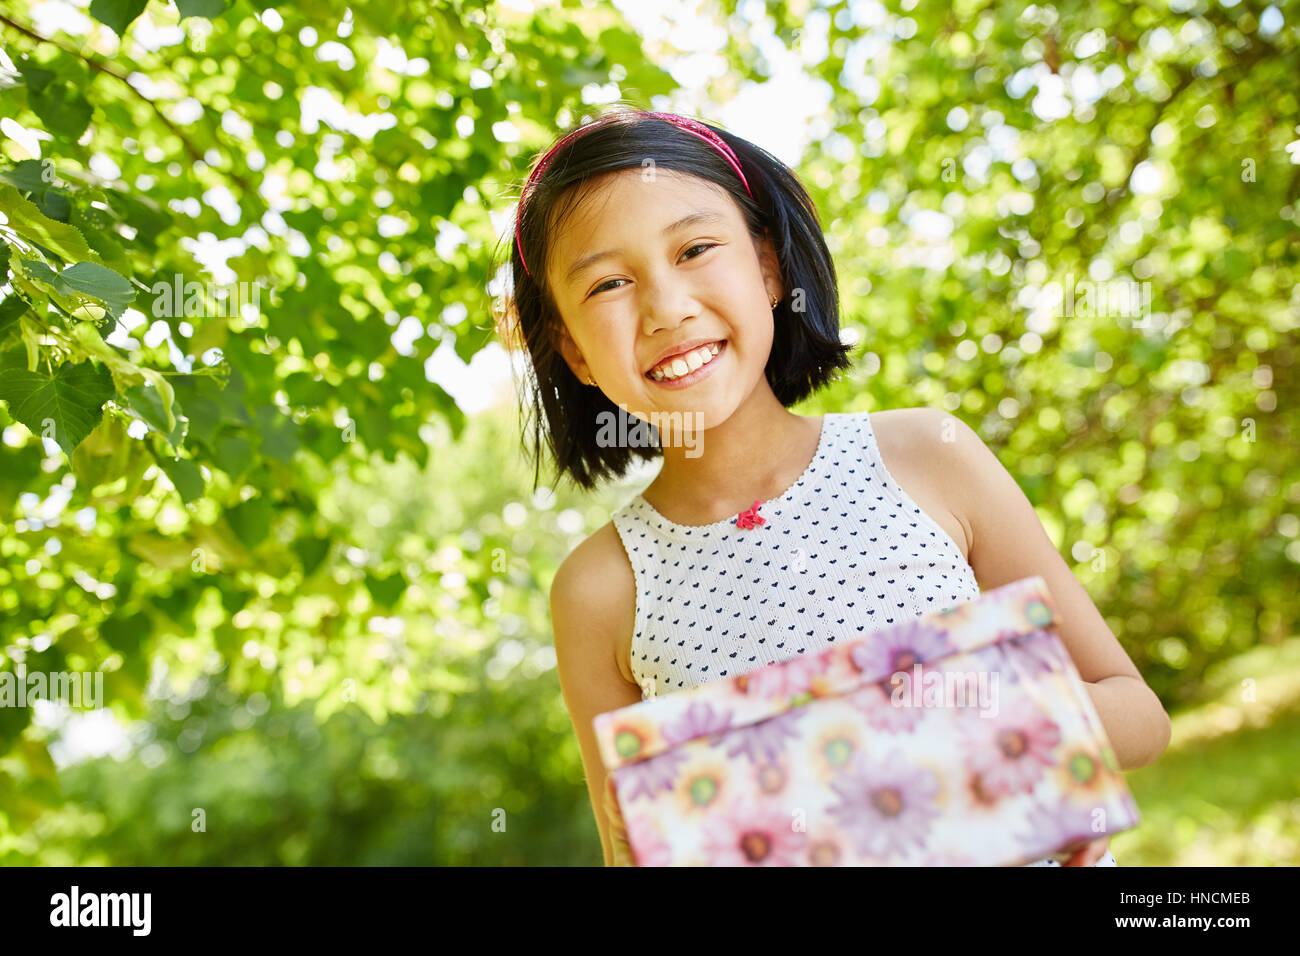 Asian girl as birthday child content with birthday gift Stock Photo